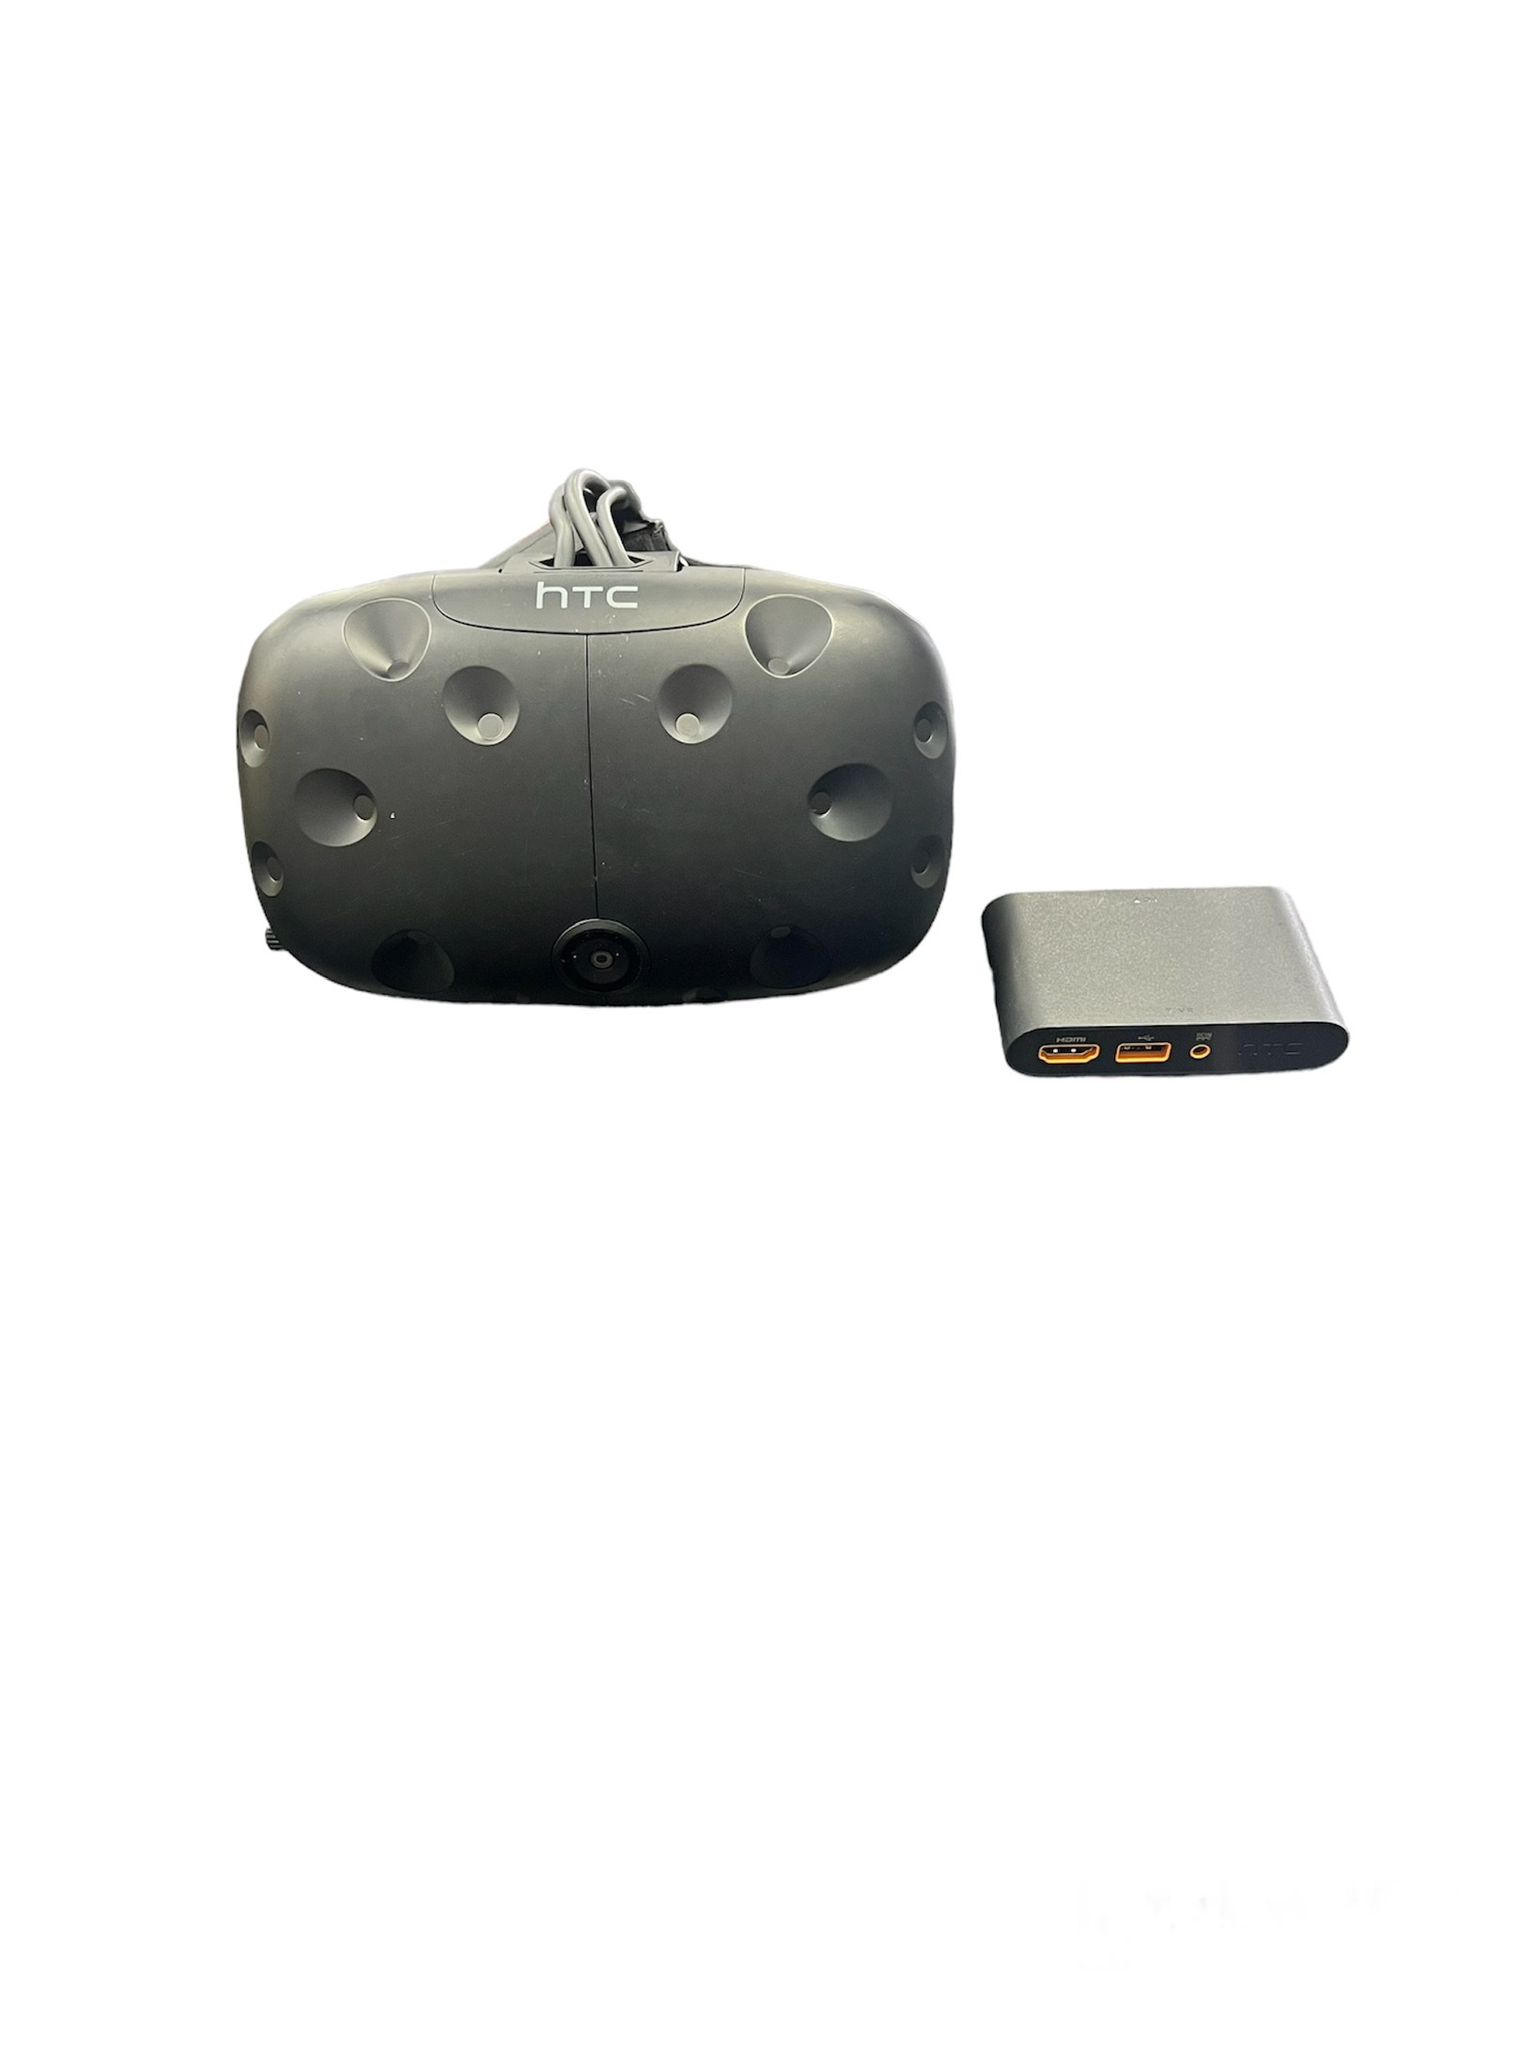 HTC Vive Headset and Link Box.